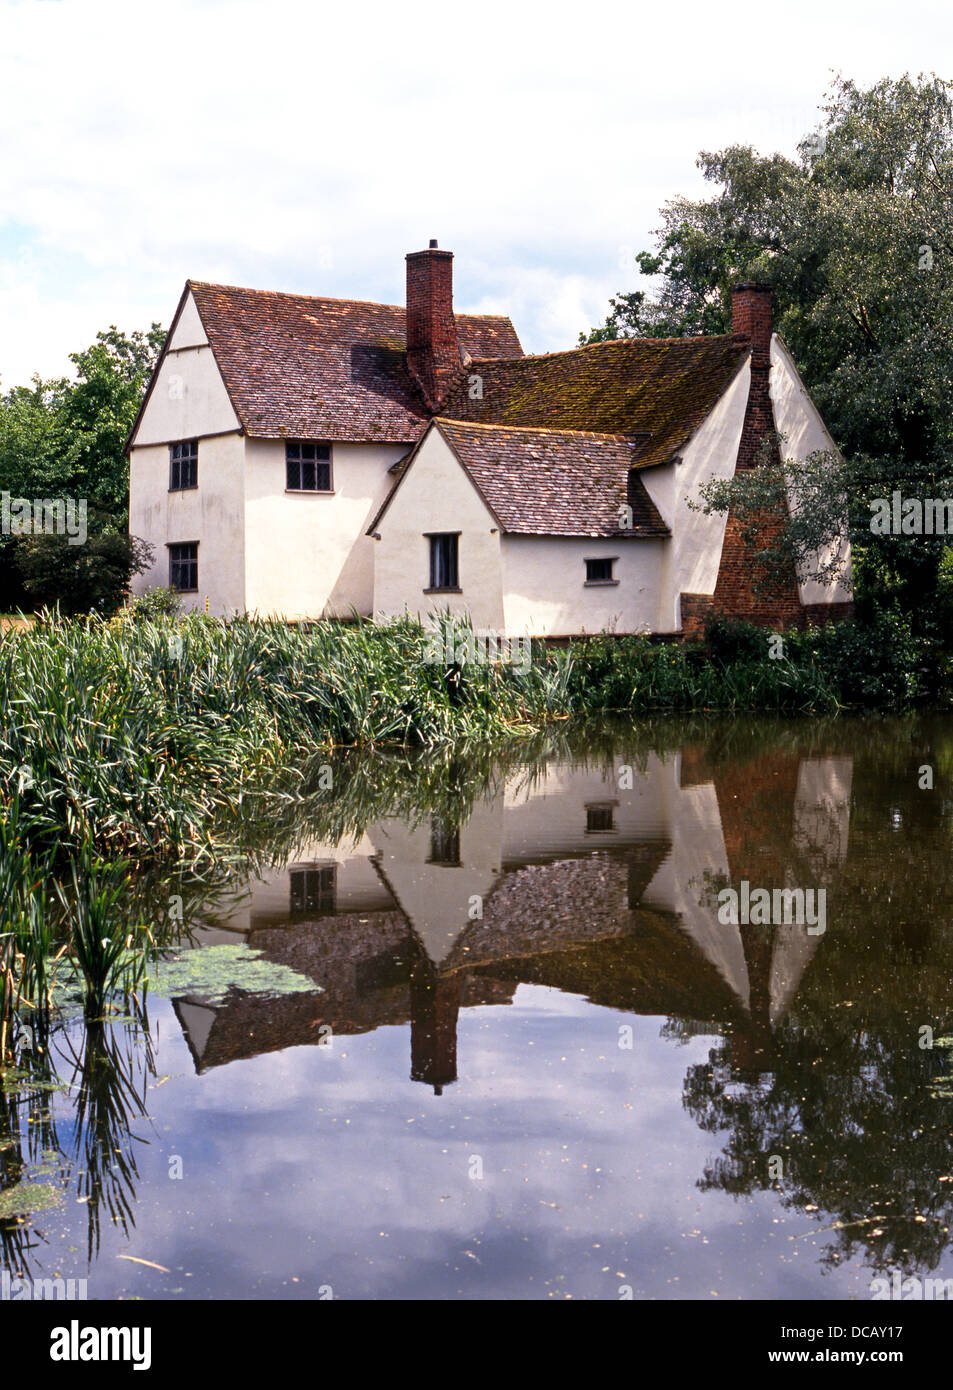 Willy Lotts Cottage along the River Stour, Flatford, East Bergholt, Suffolk, England, UK, Western Europe. Stock Photo